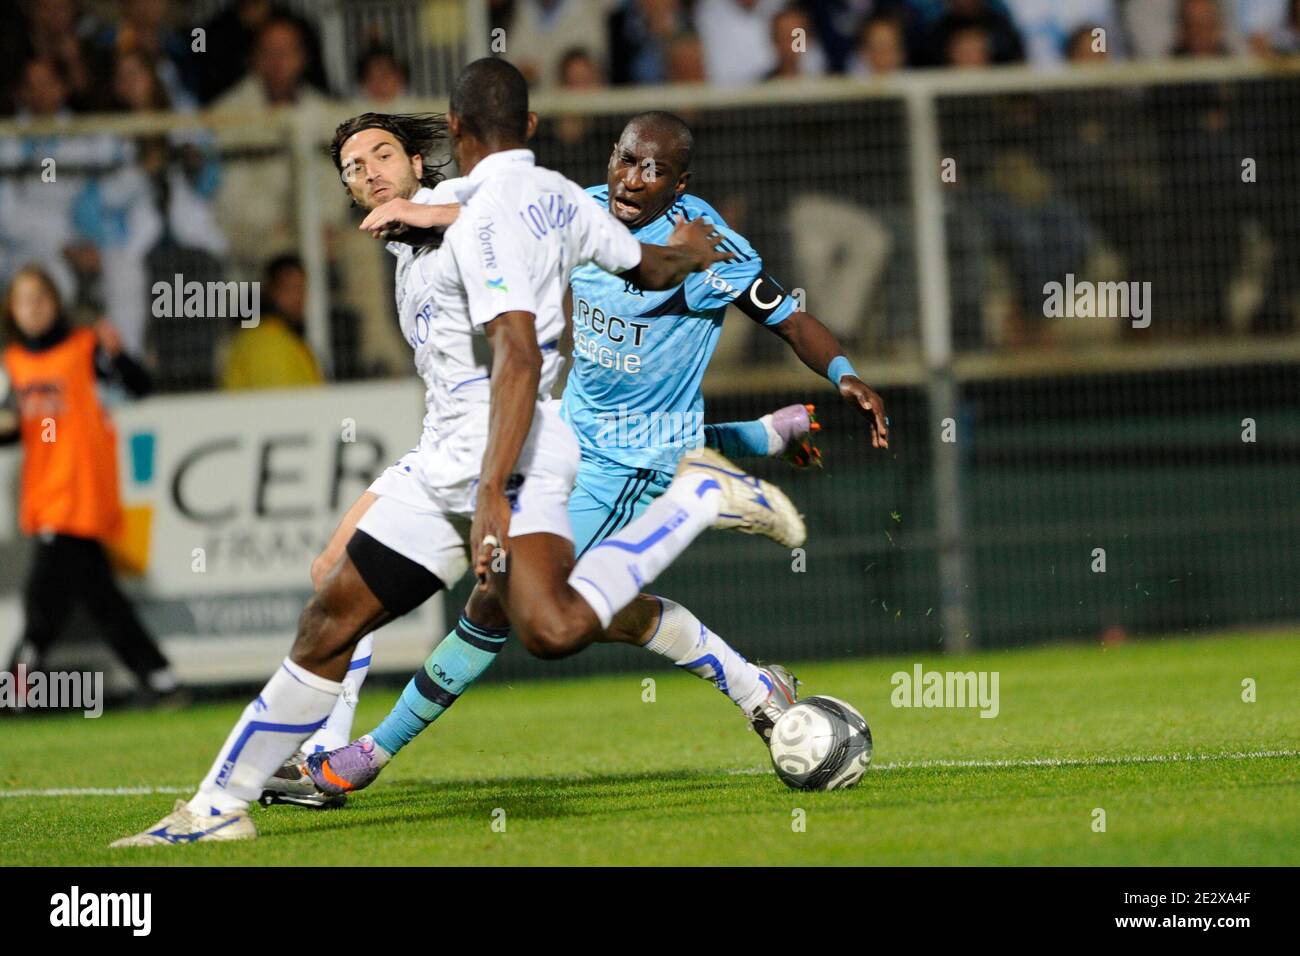 Marseille's captain Mamadou Niang during the French First League Soccer  match, AJ Auxerre vs Olympique de Marseille at Abbe Deschamps Stadium in  Auxerre, France on April 30, 2010. The match ended in